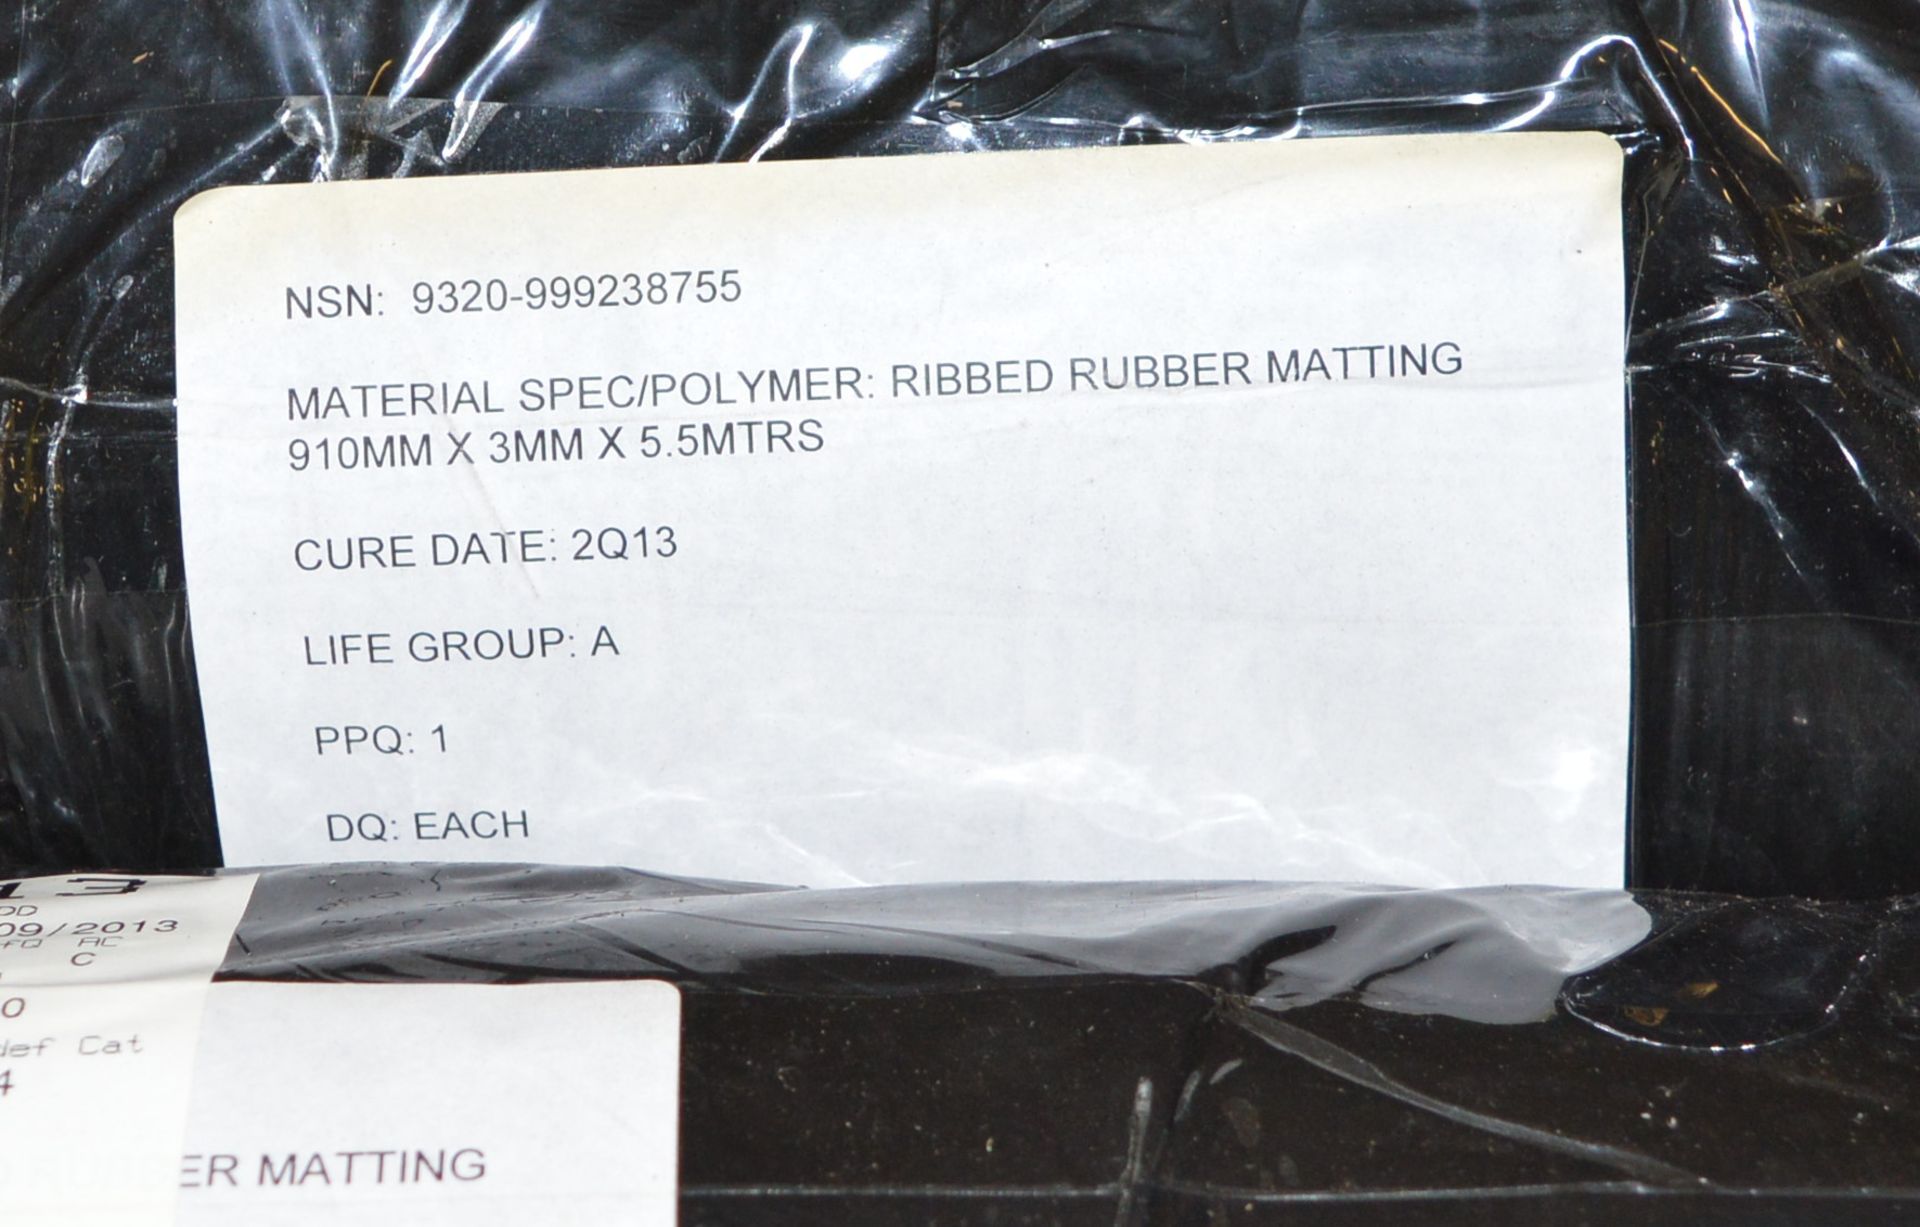 5x Rolls Rubber Matting Ribbed, 910mm x 3mm x 5.5mtr. - Image 2 of 3